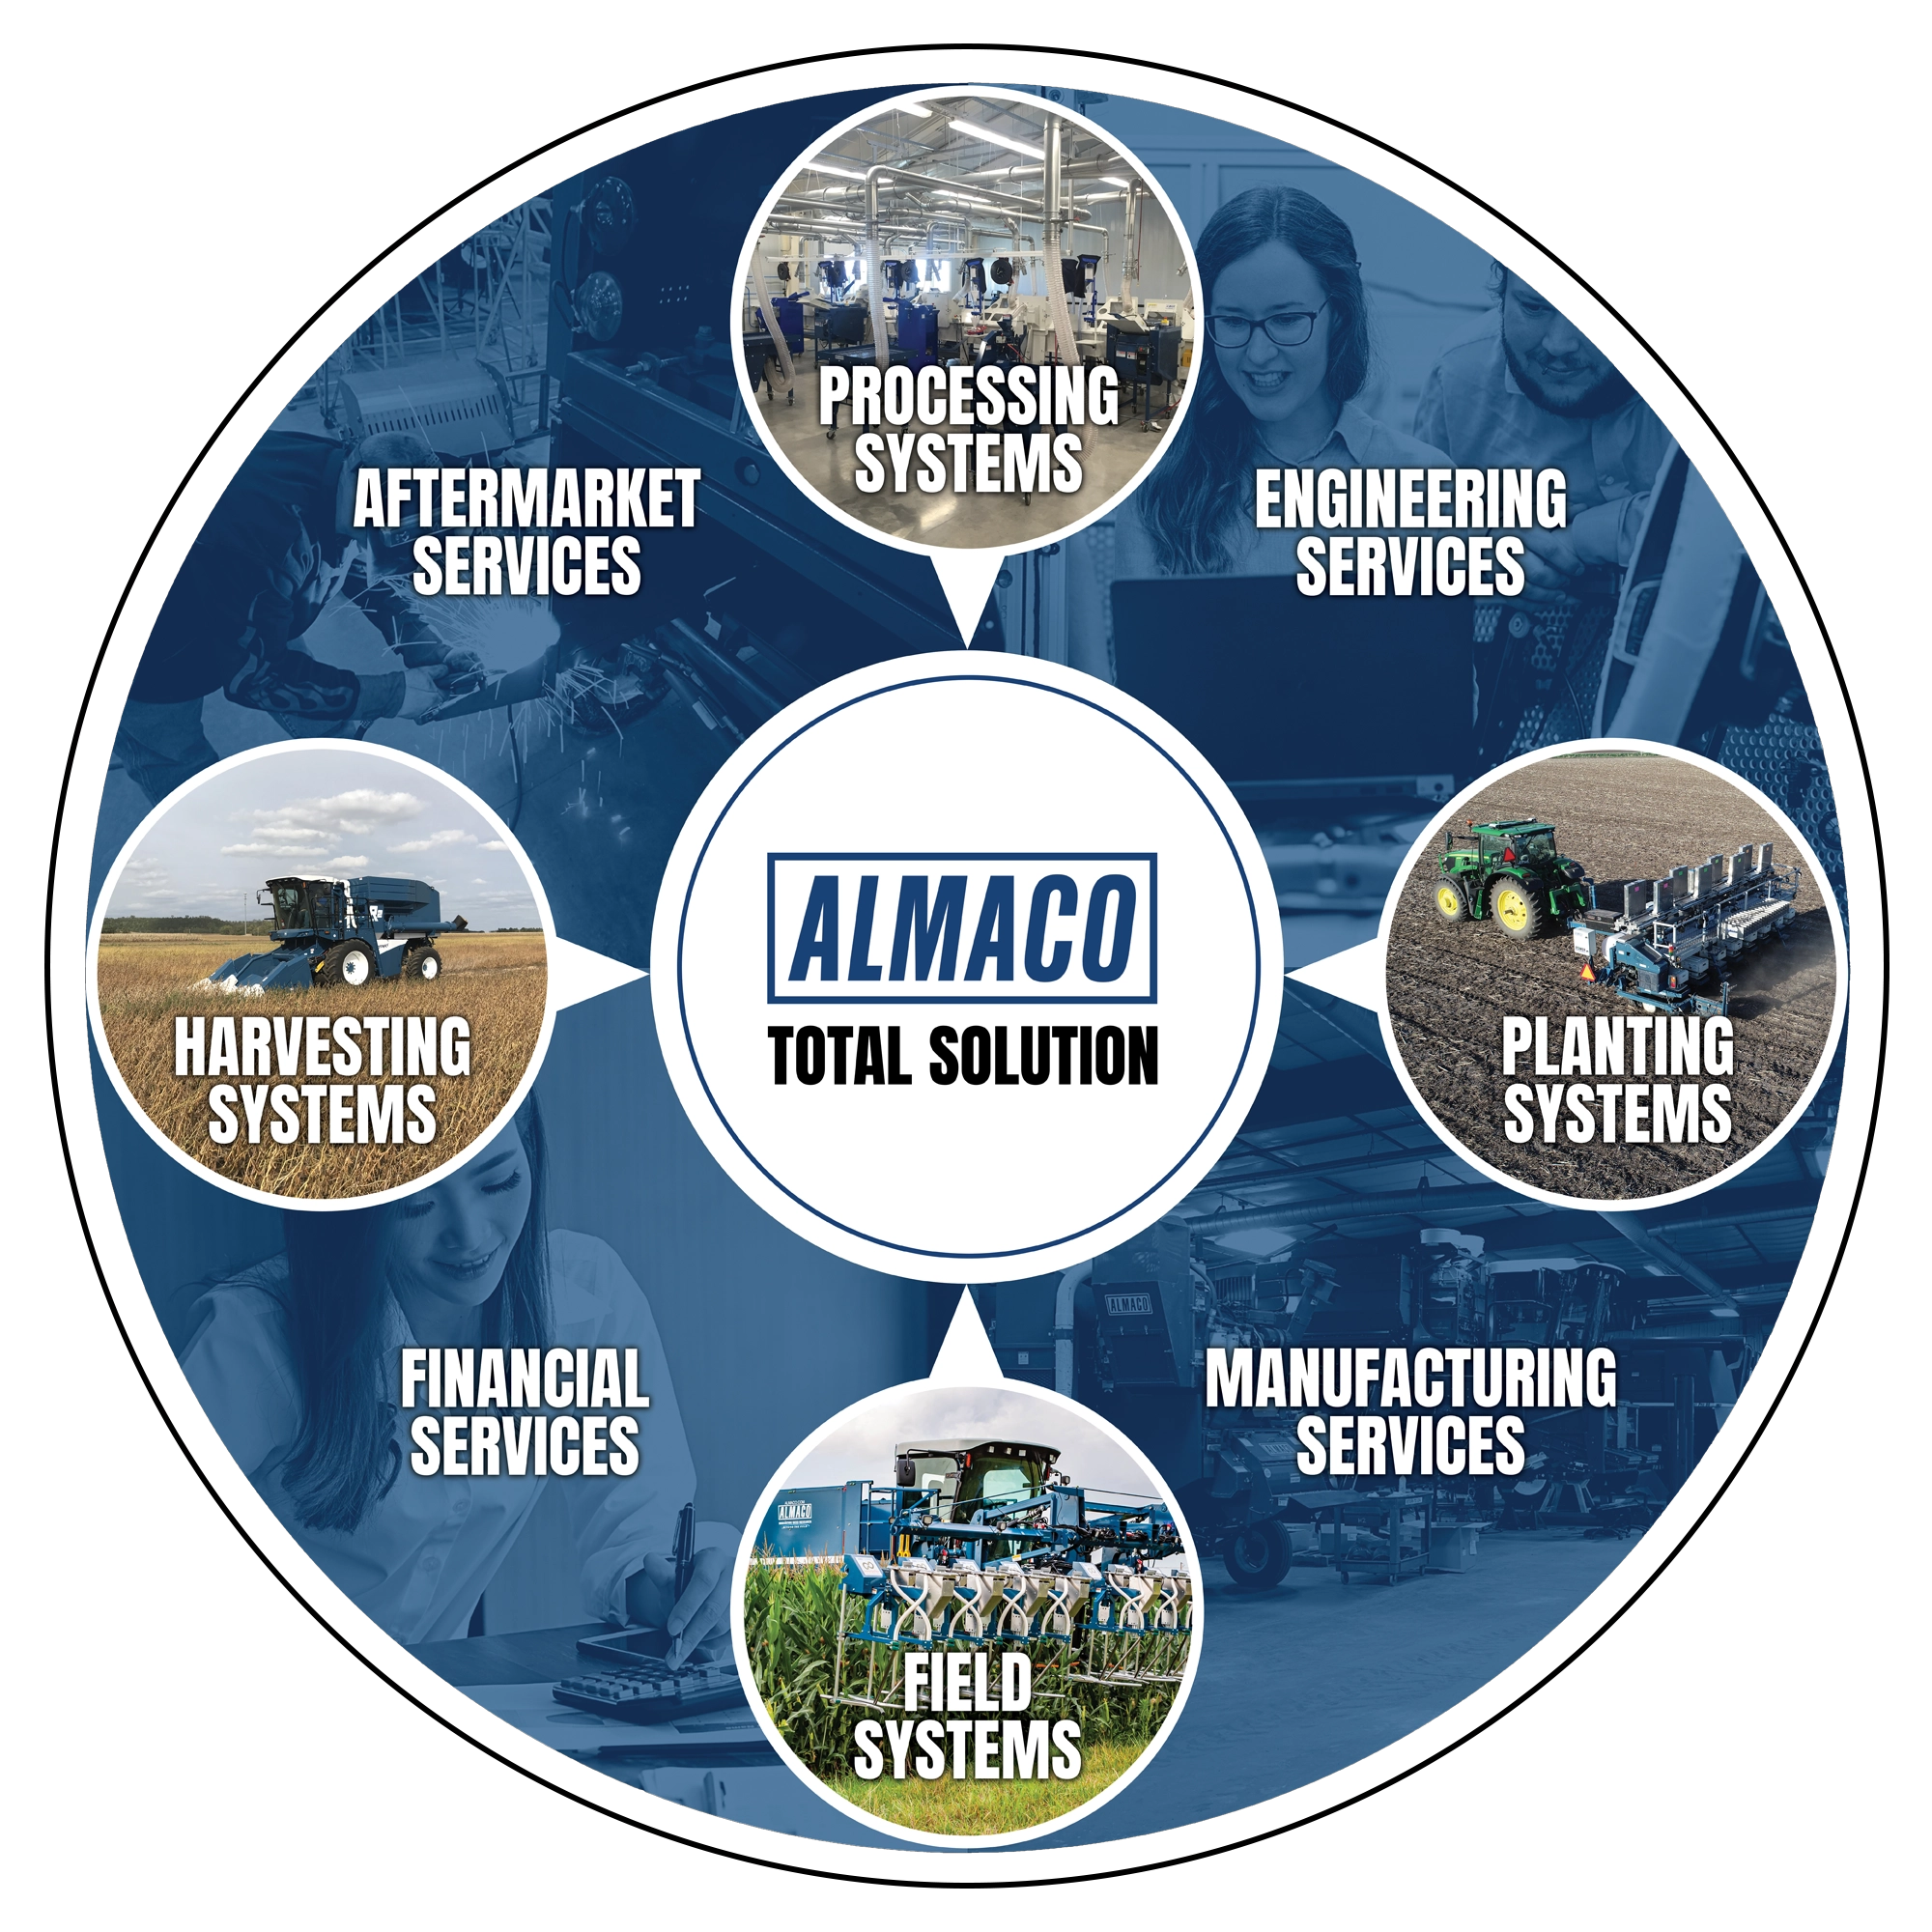 ALMACO total solutions